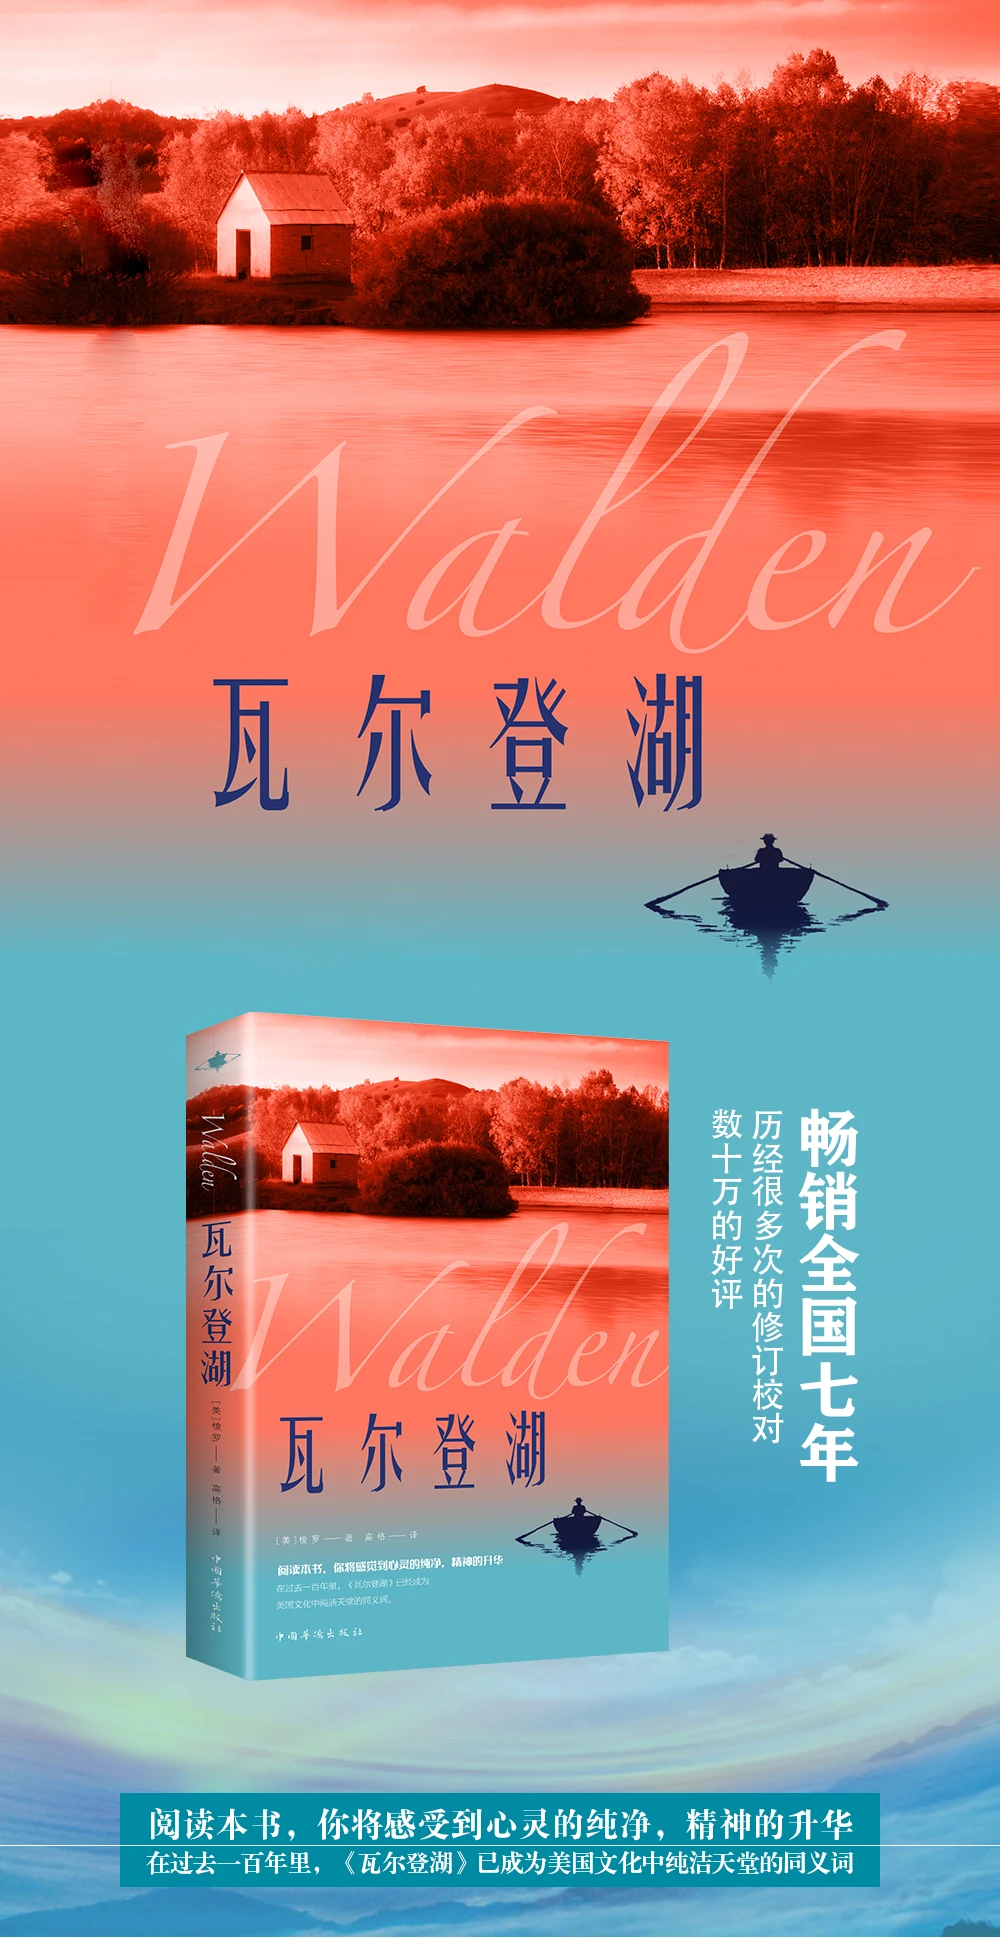 

World Famous Works Adult Books Walden Lake Books In Chinese Version for Adults Literature Mandarin Practice Chinese Books